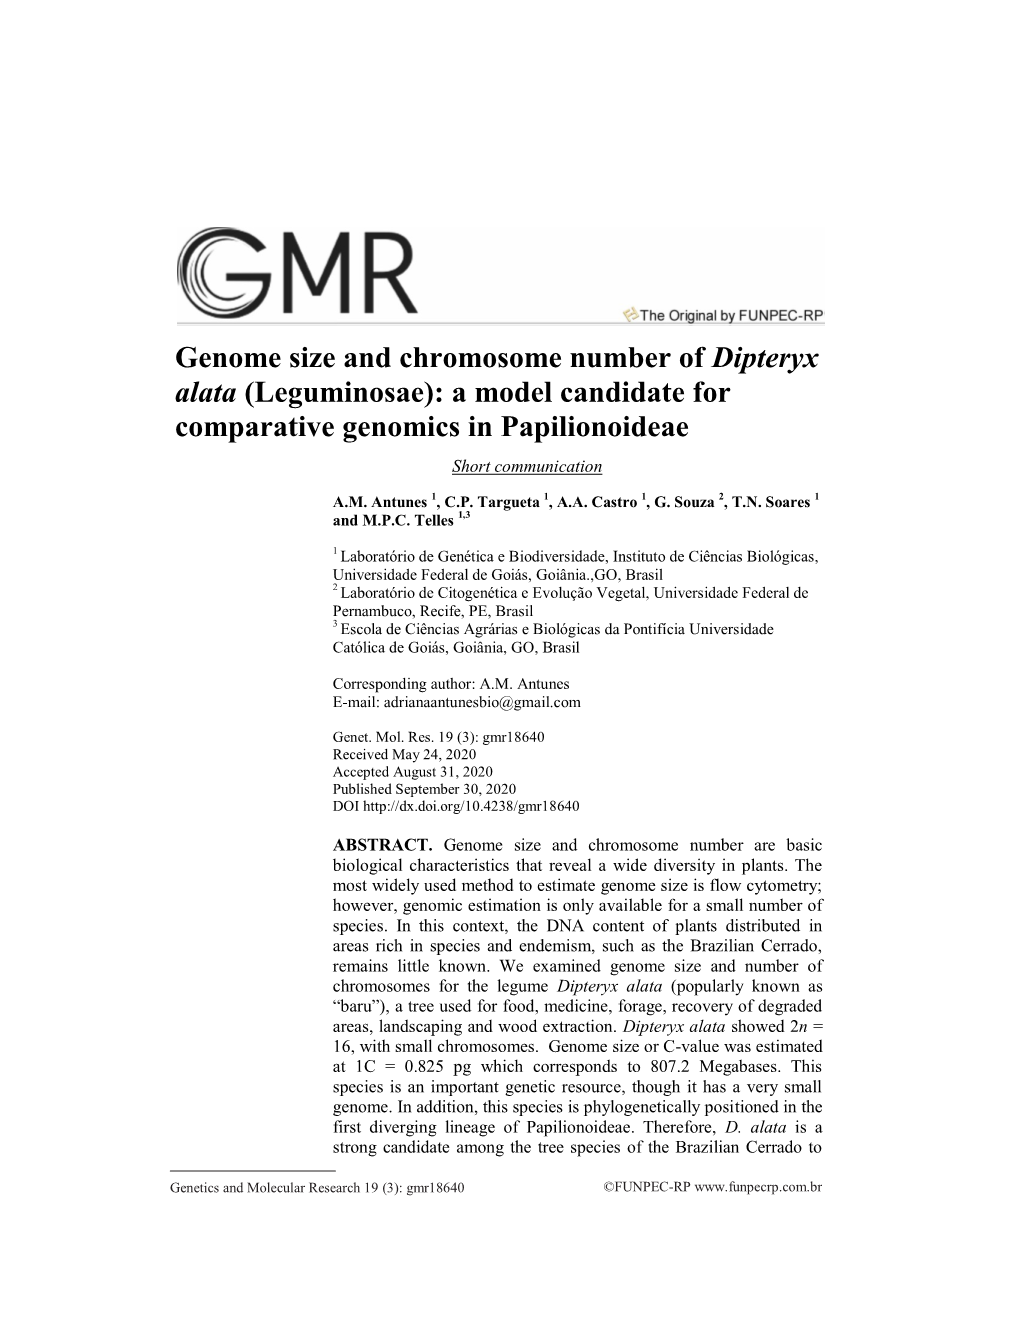 Genome Size and Chromosome Number of Dipteryx Alata (Leguminosae): a Model Candidate for Comparative Genomics in Papilionoideae Short Communication